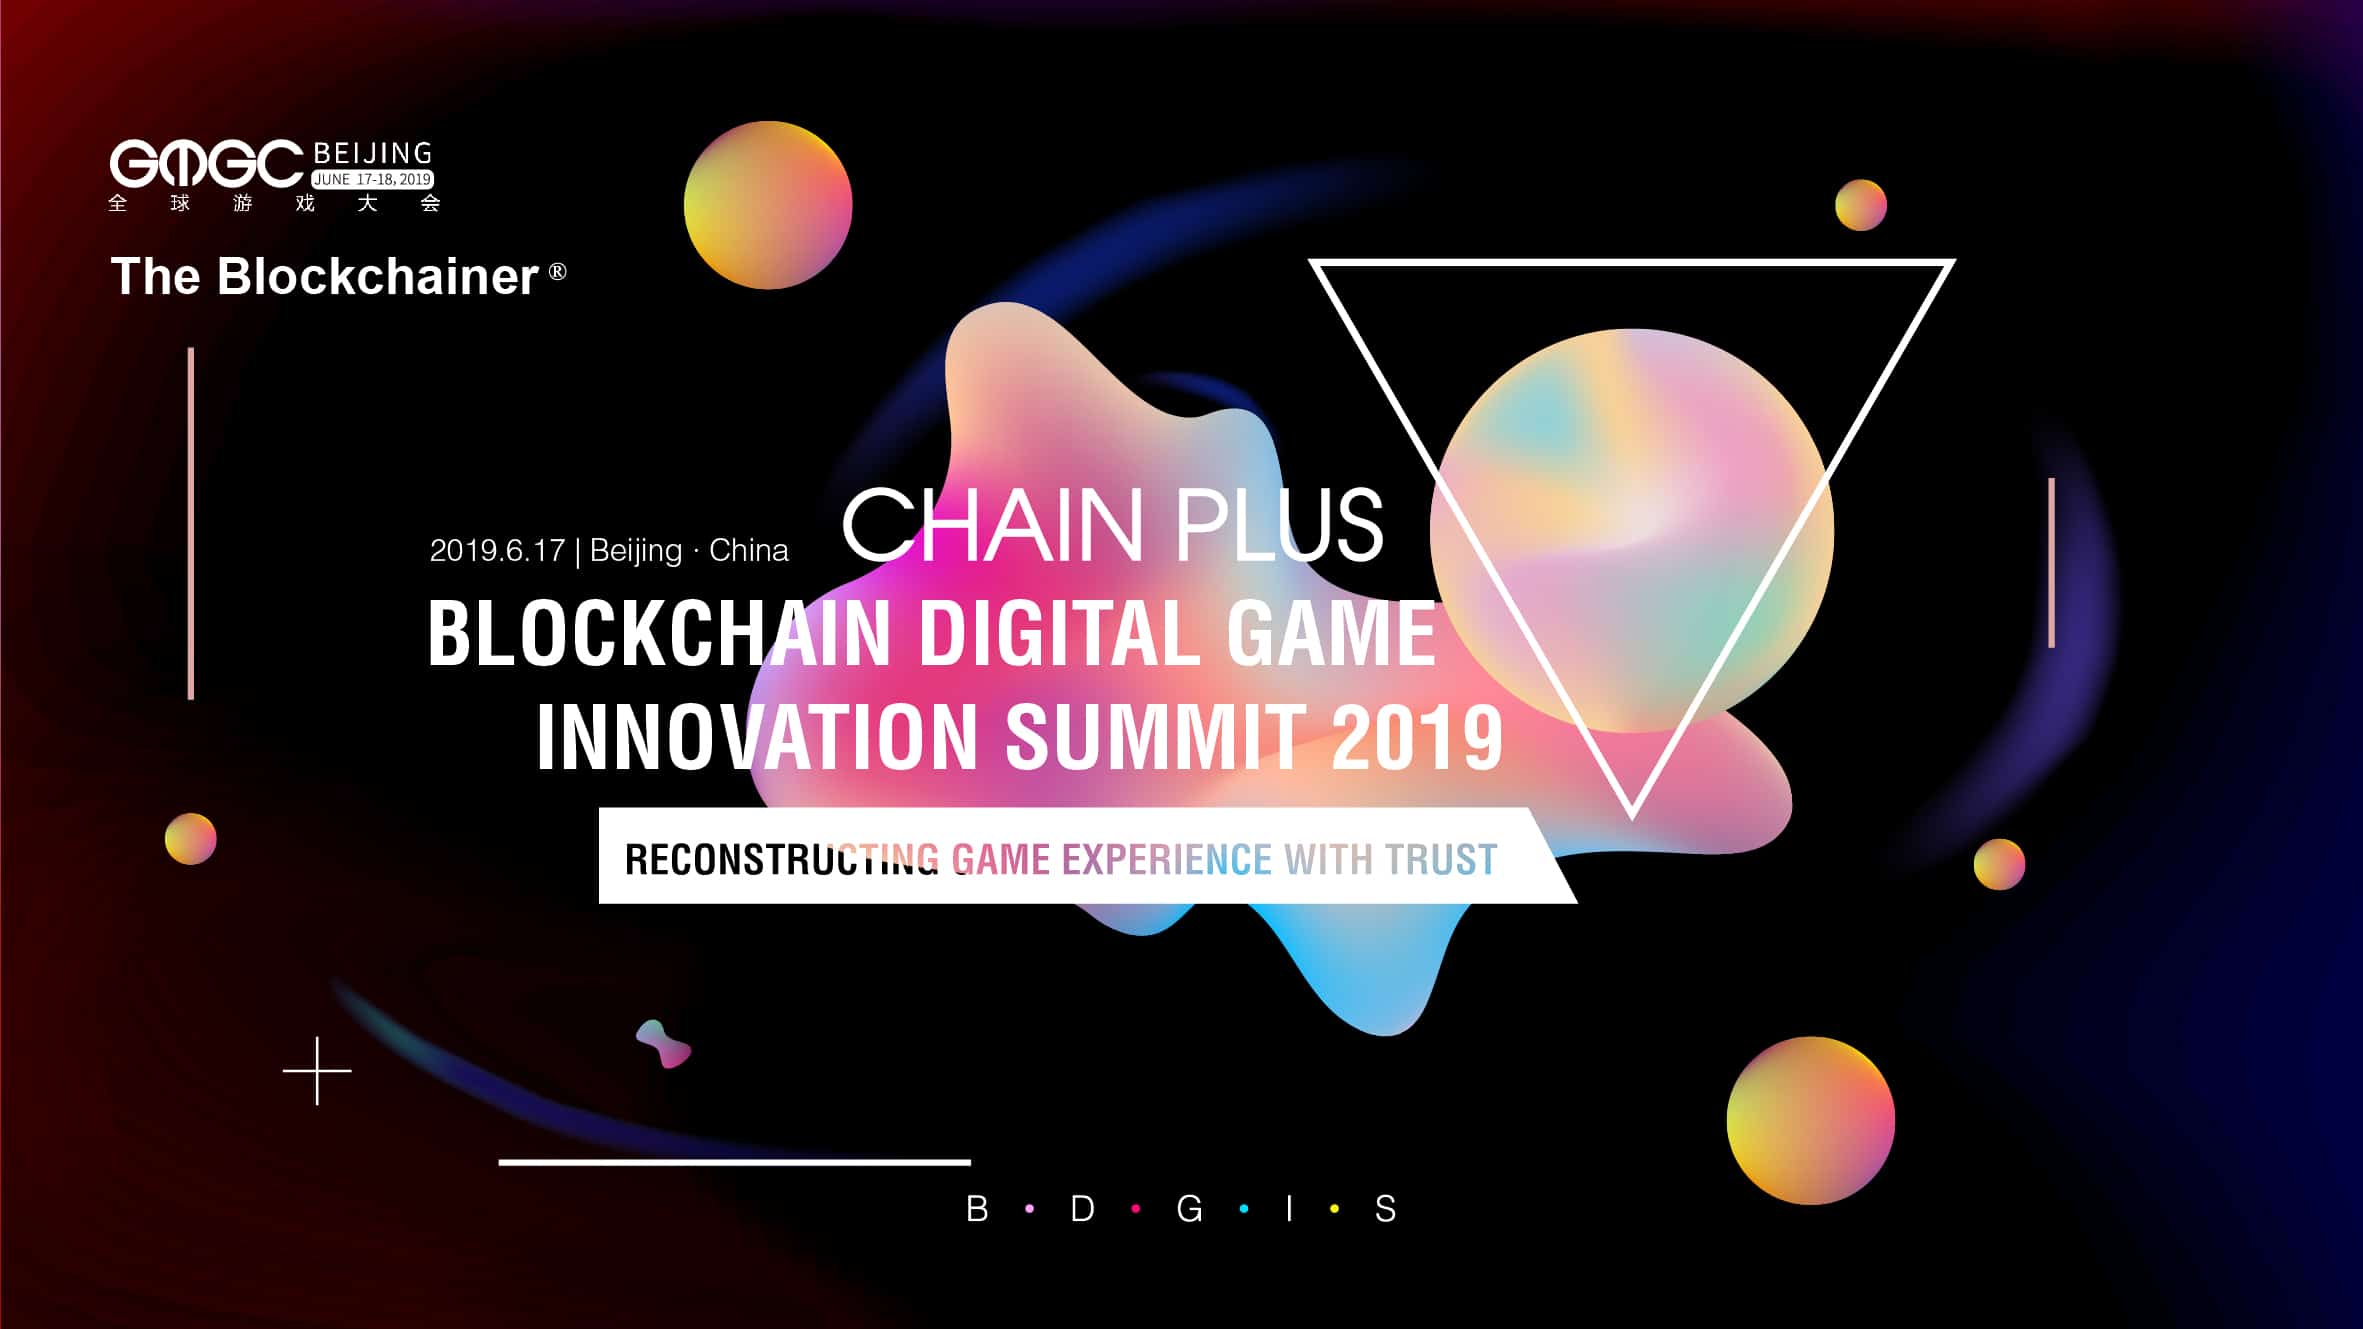 blockchain digital game summit As the fastest growing and largest game event in China, the Global Mobile Game Congress (GMGC) is highly focused on delivering an international platform for sharing industry trends and ideas in the ever-evolving mobile game industry.